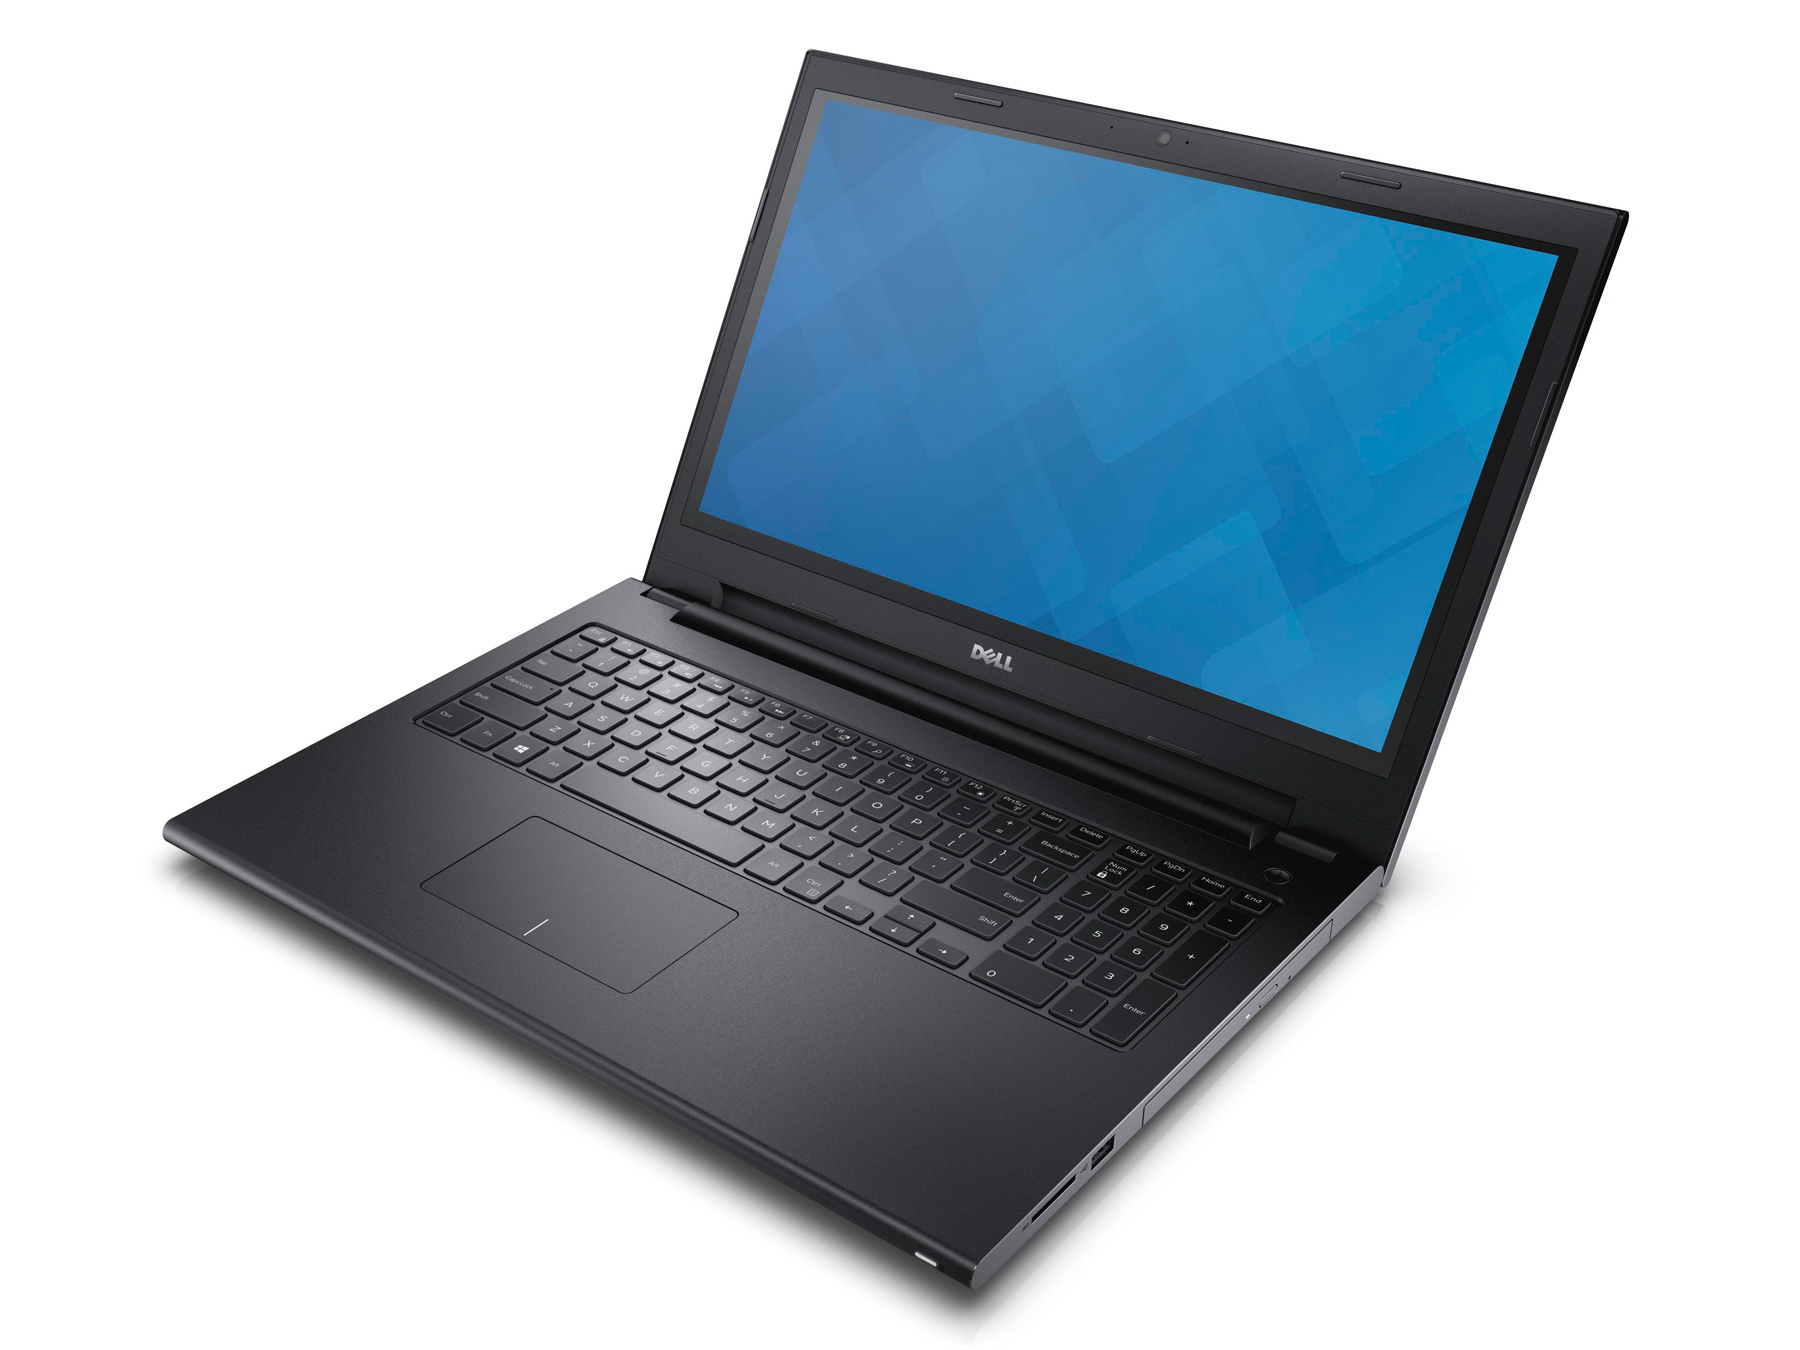 Dell Inspiron 15 3542-2293 Notebook Review - NotebookCheck.net Reviews